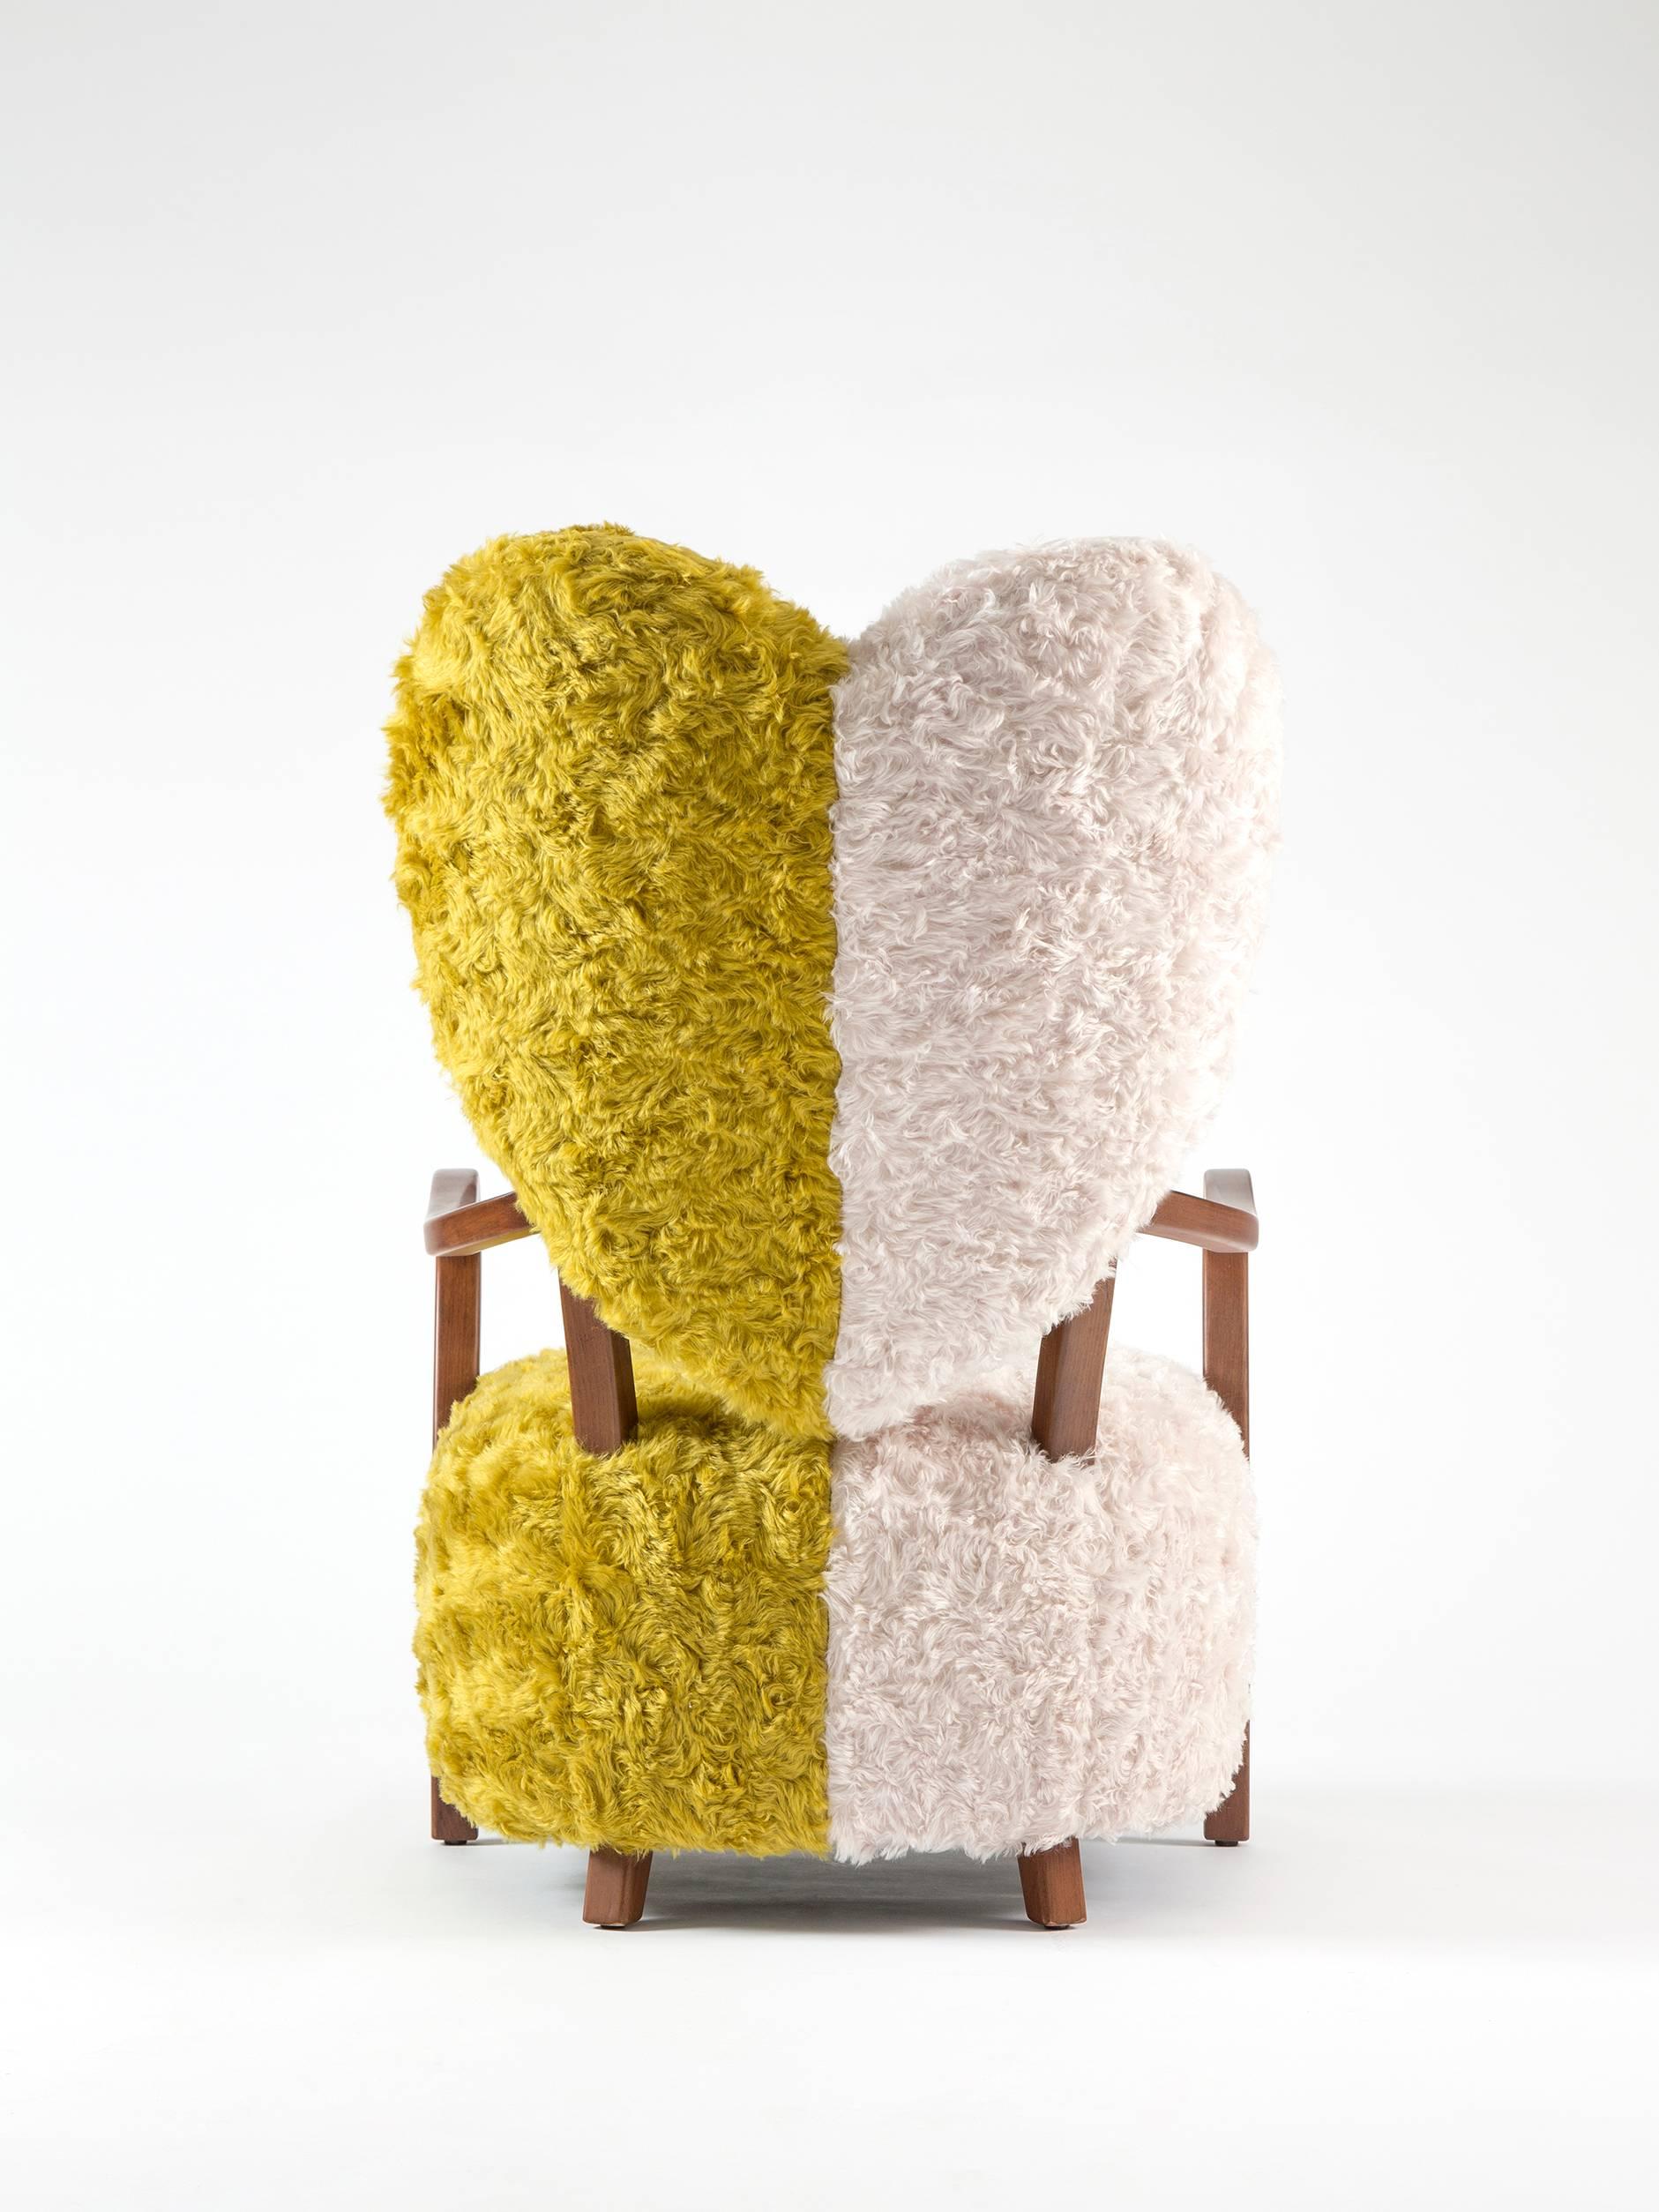 Turkish Contemporary Uni Armchair with Heart Shaped Back and Yellow and White Mohair For Sale